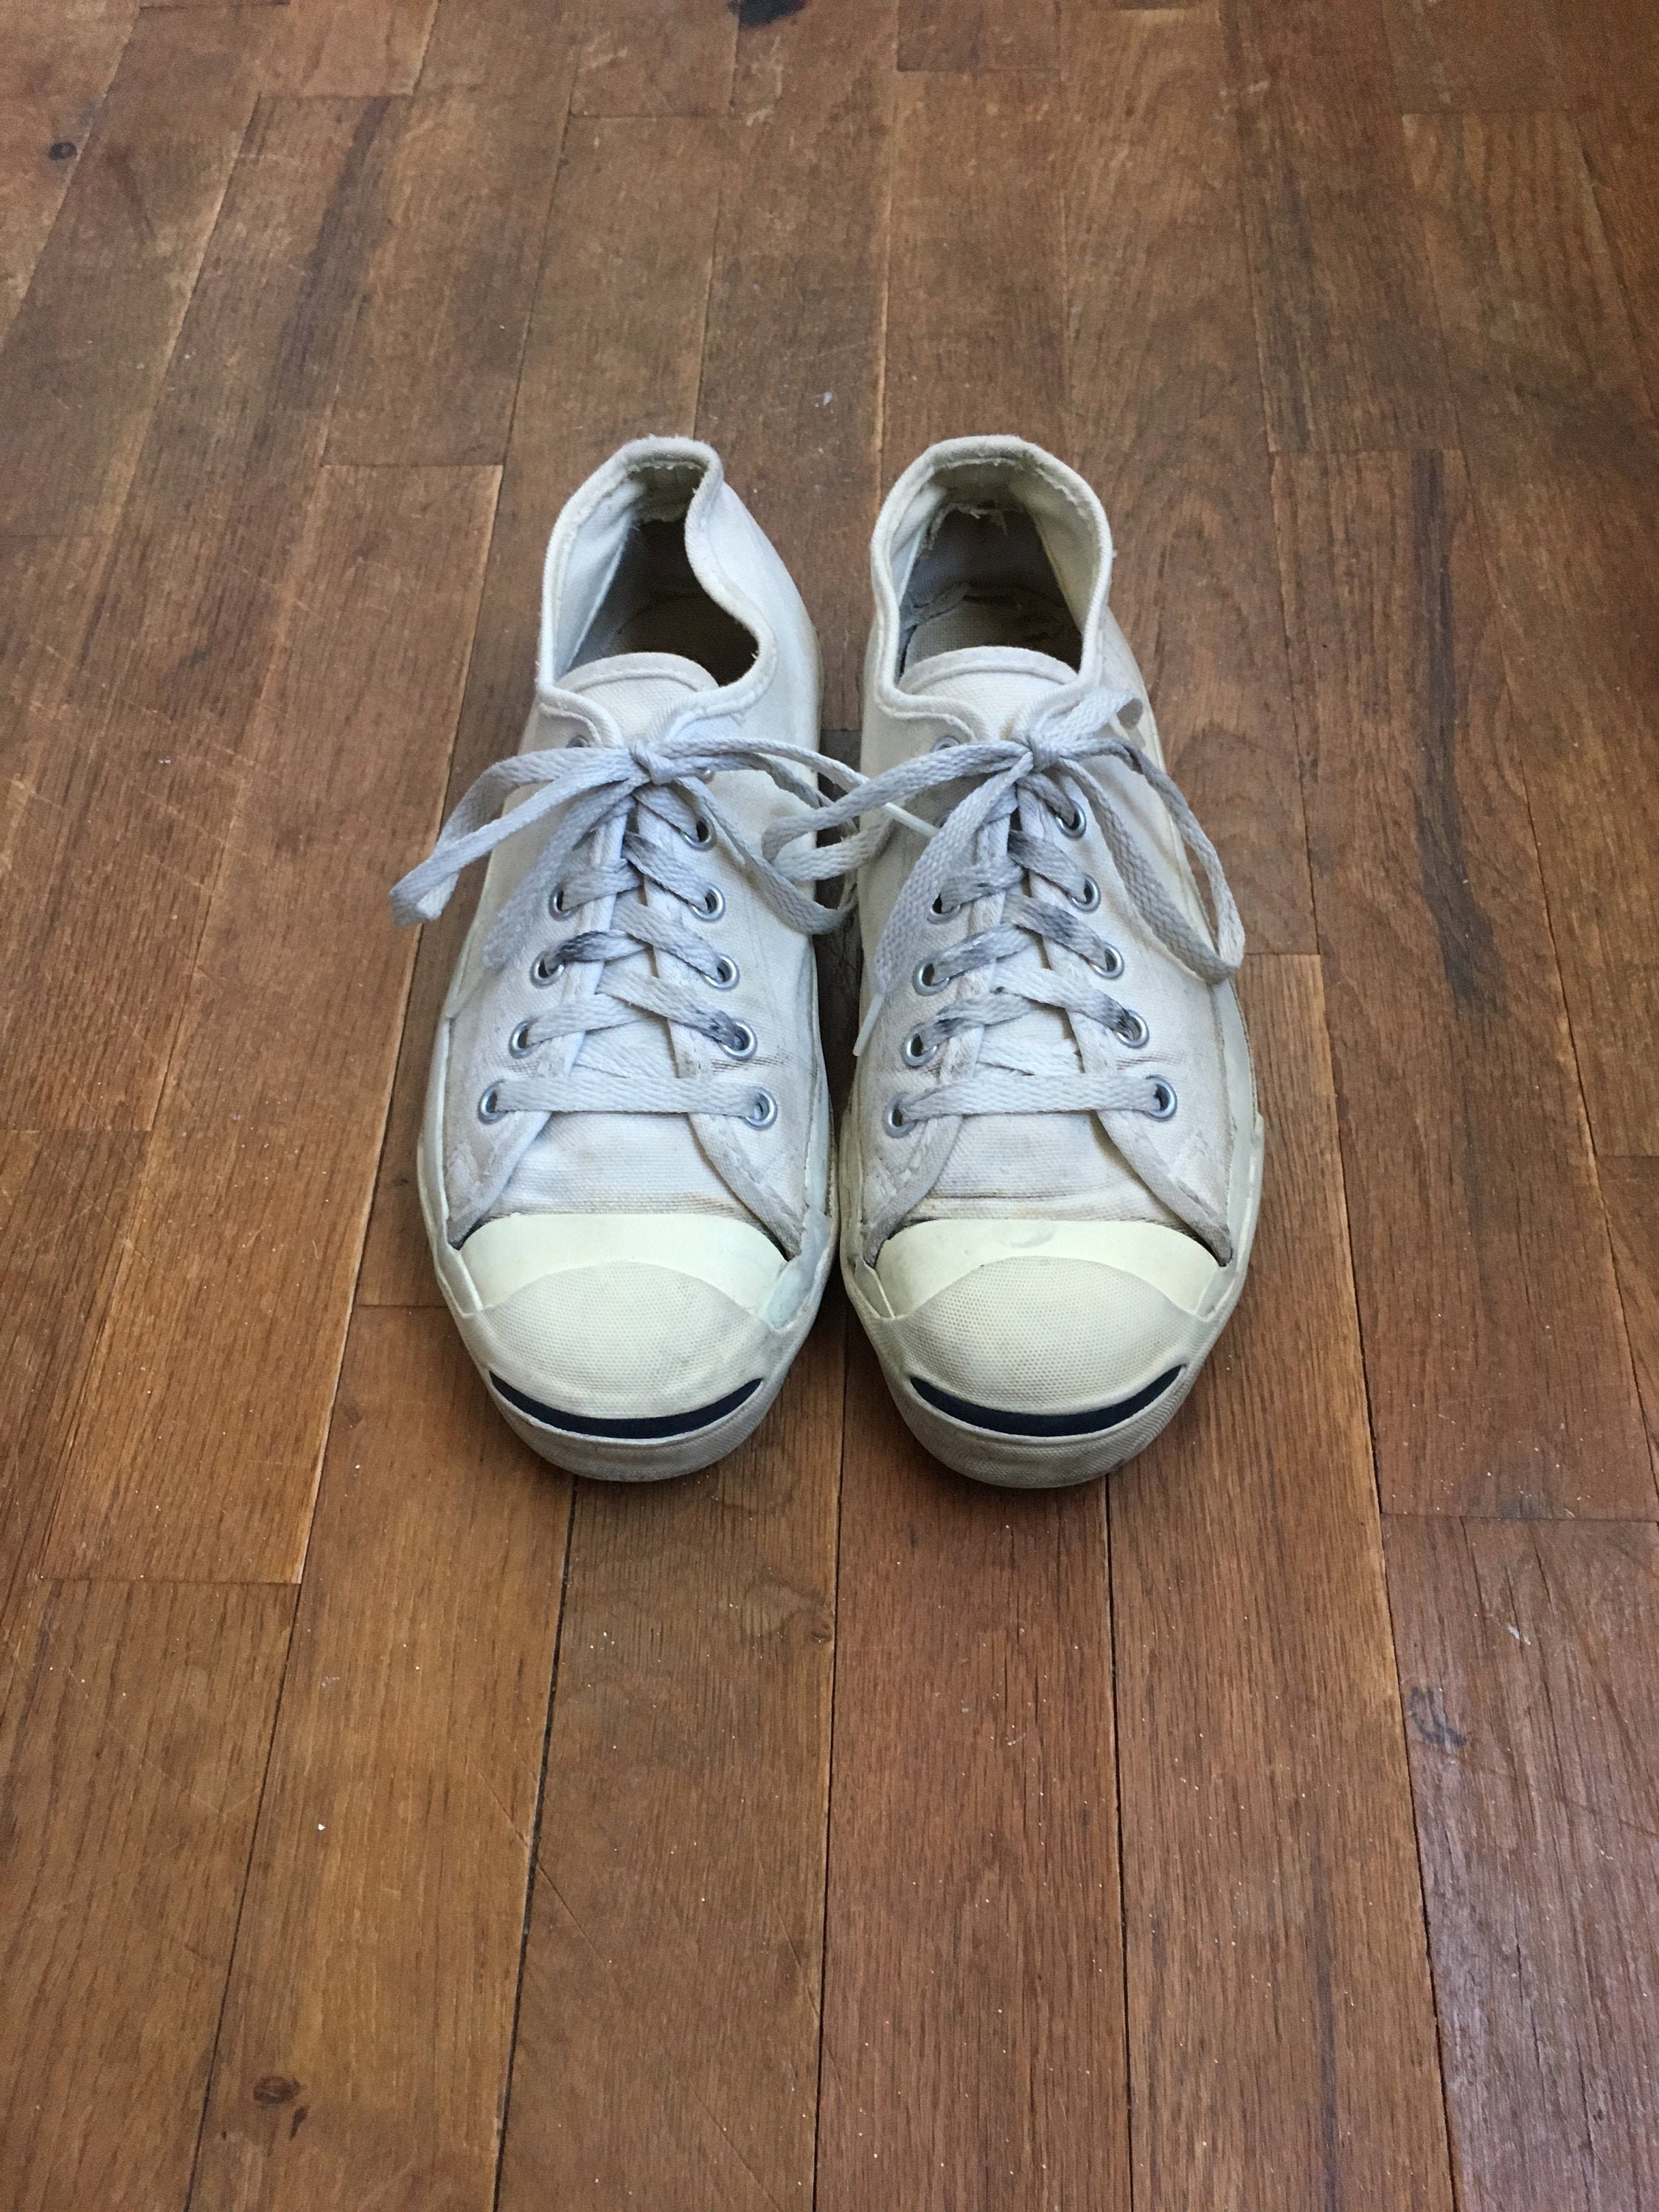 Vintage Jack Purcell Converse White Canvas Sneakers Made in - Etsy